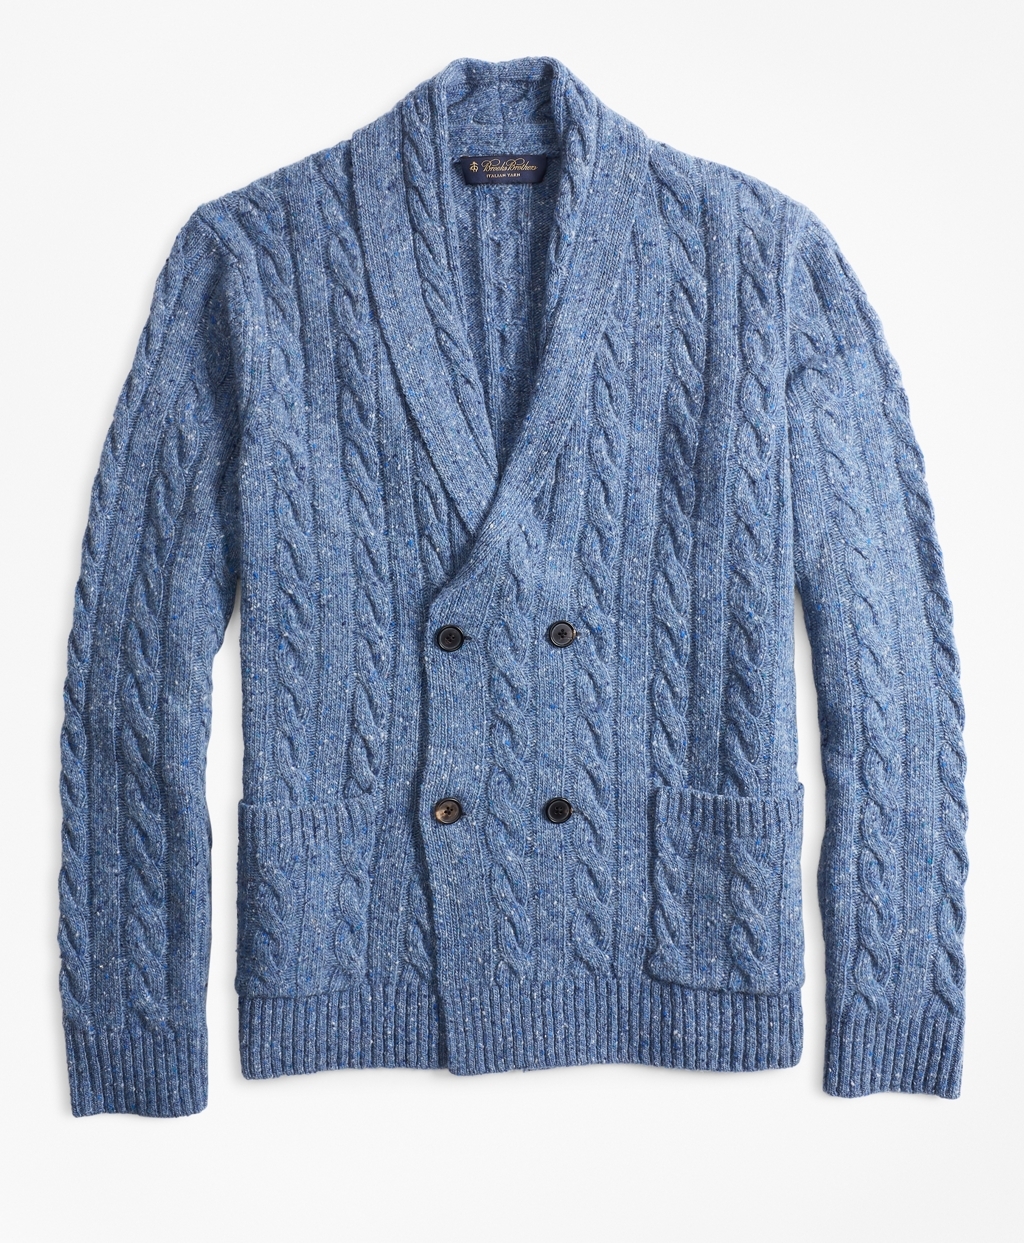 blue sweater dad gifts